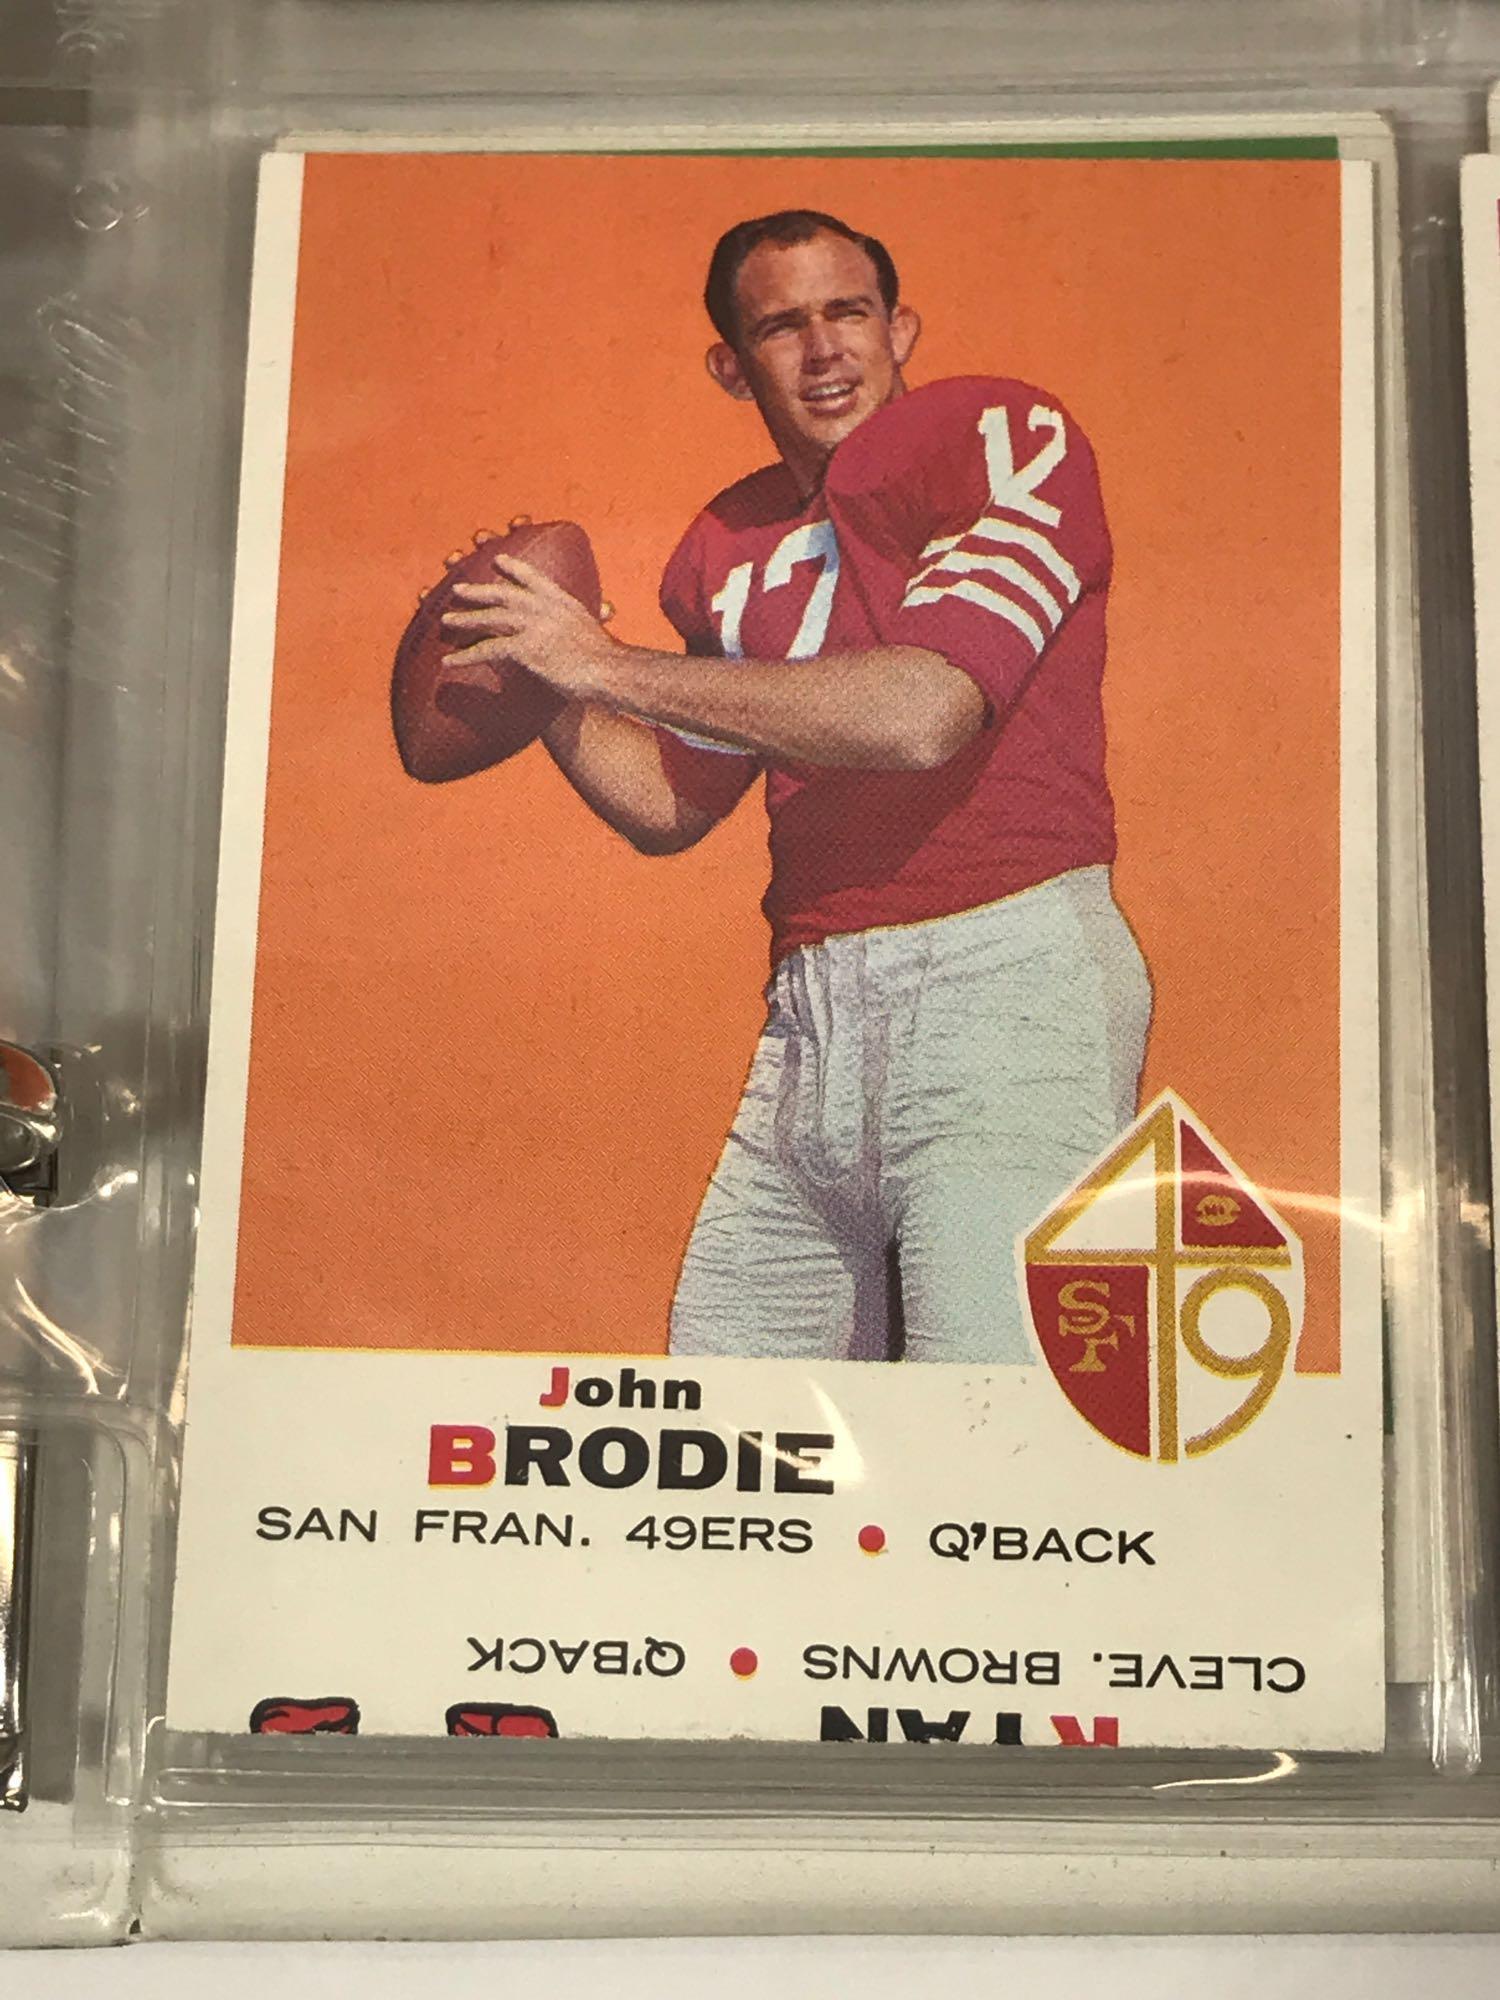 1-263 Complete Set of Topps 1969 NFL Football Cards In Binder